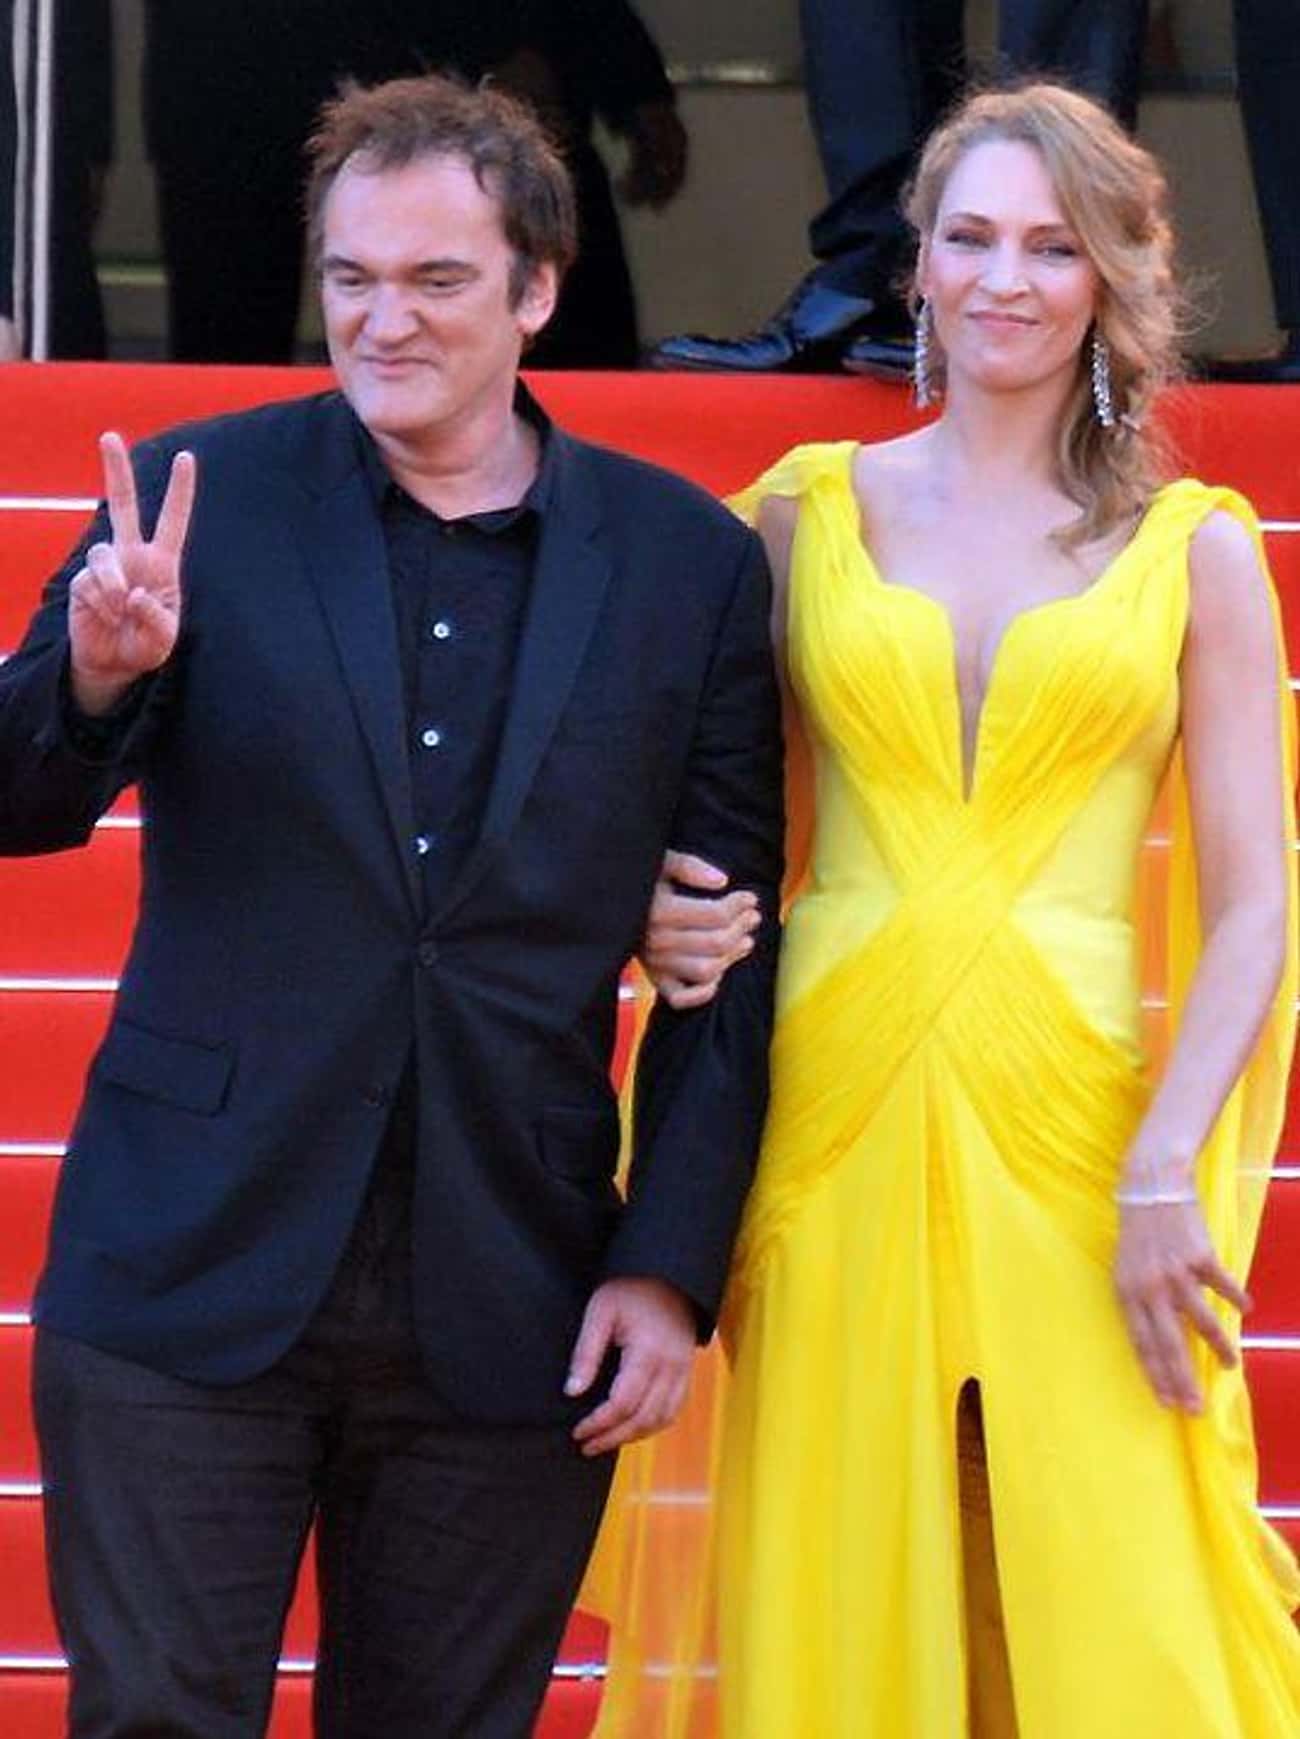 Quentin Tarantino Spat On And Choked Her During The Filming Of 'Kill Bill'